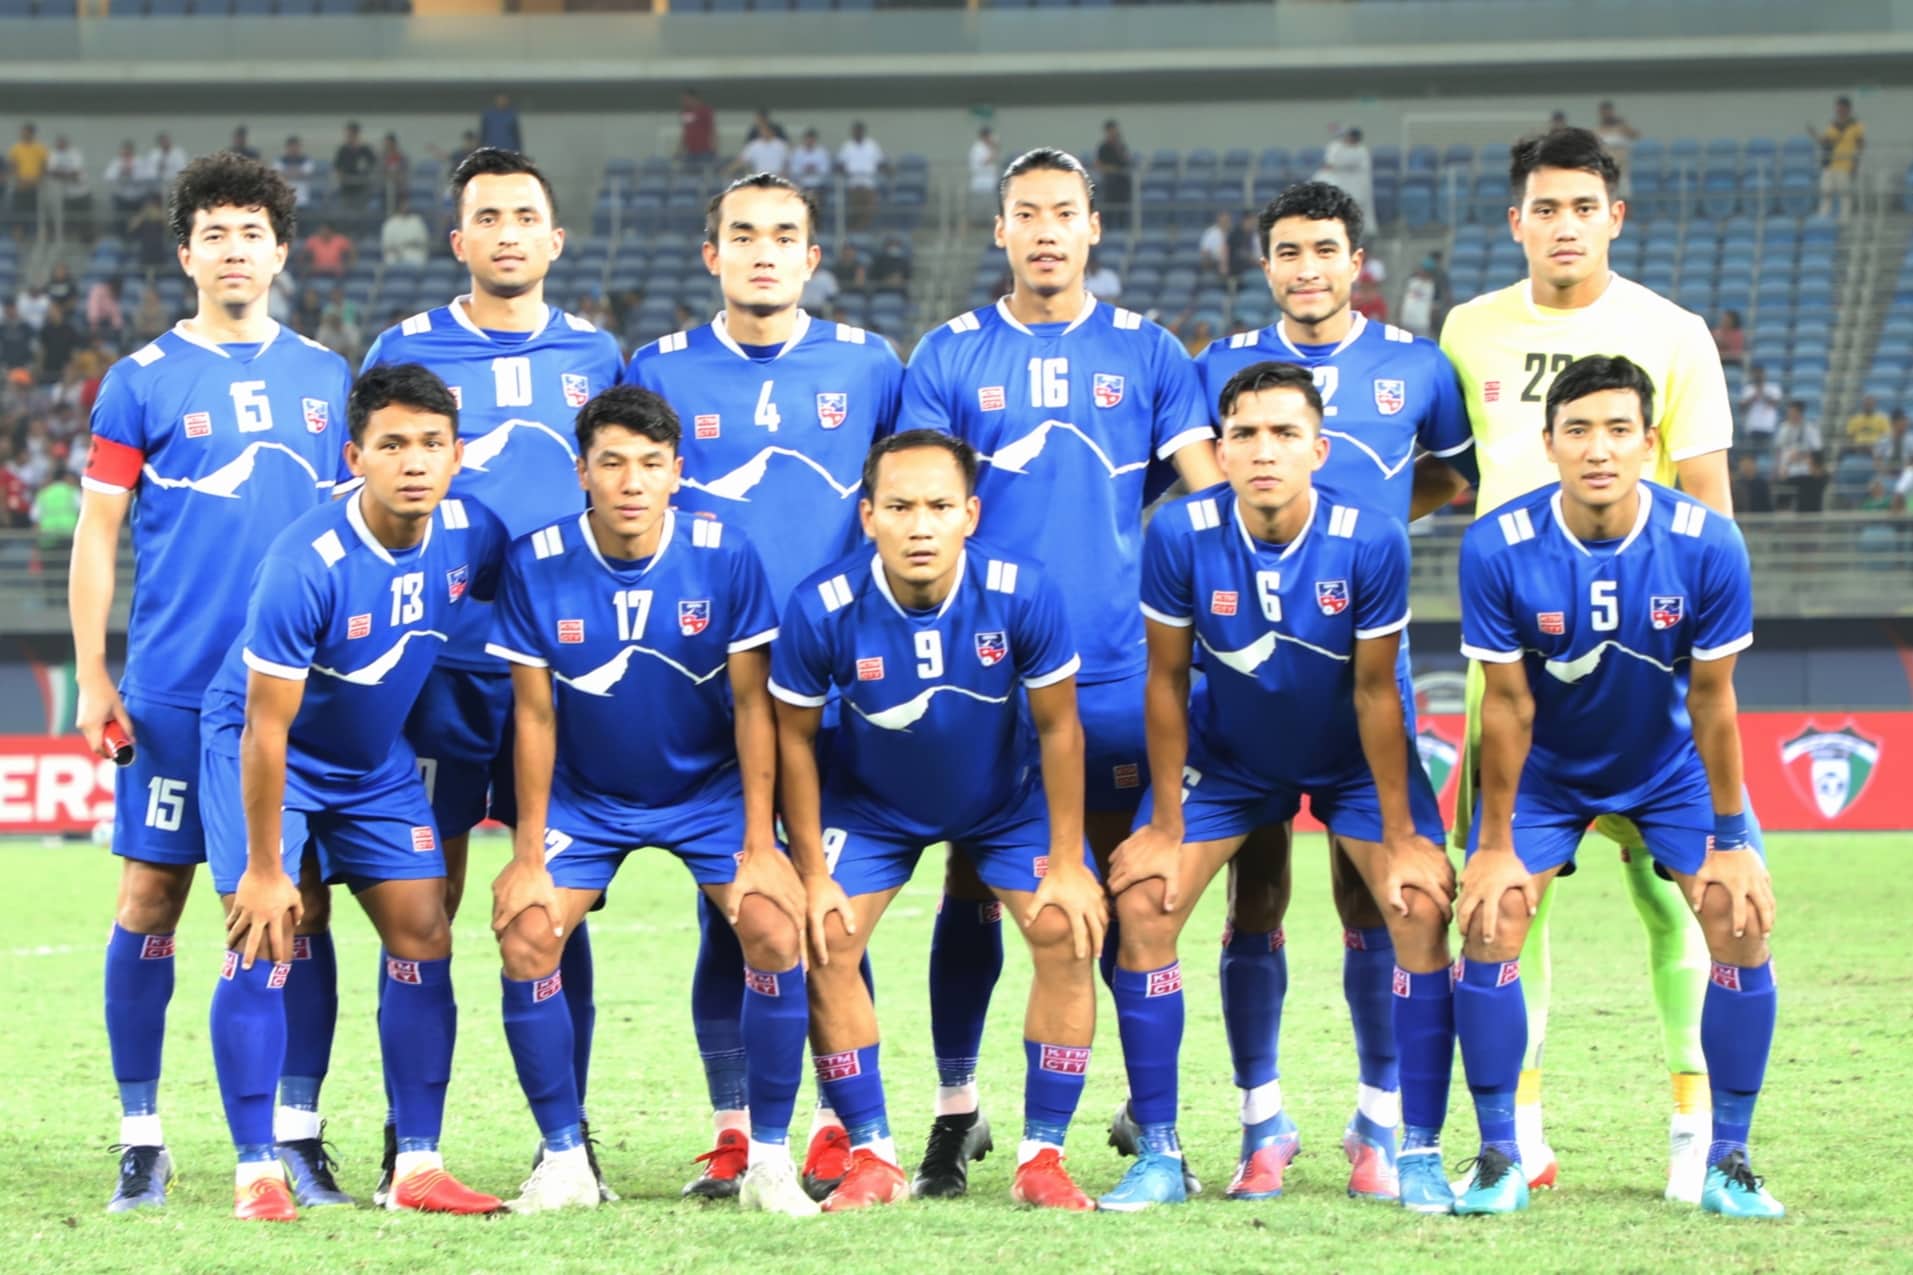 Nepal loses 7-0 to Indonesia